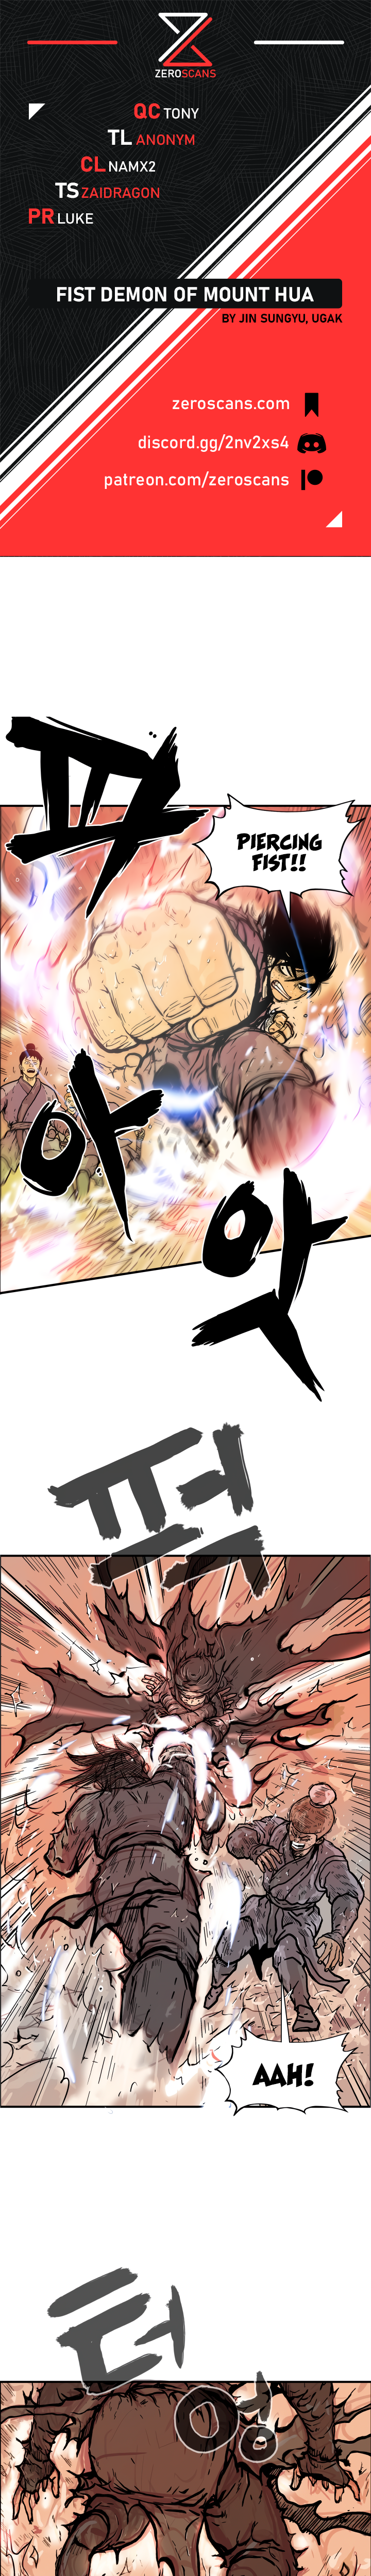 Fist Demon of Mount Hua - Chapter 3935 - Image 1